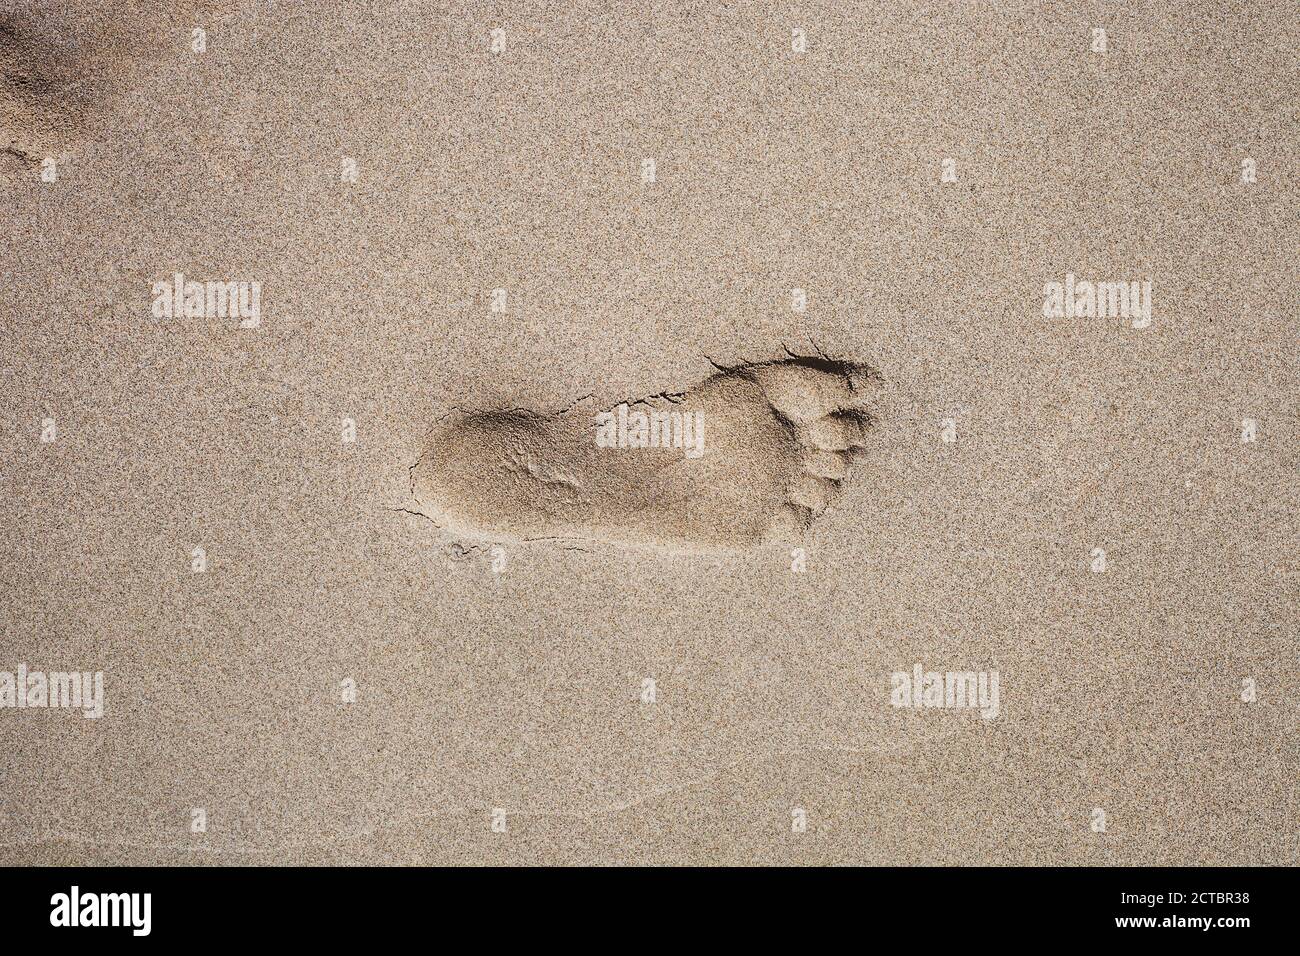 Imprint of right human foot in sand. Mans footprint on sandy beach top view, concept of alone walking Stock Photo